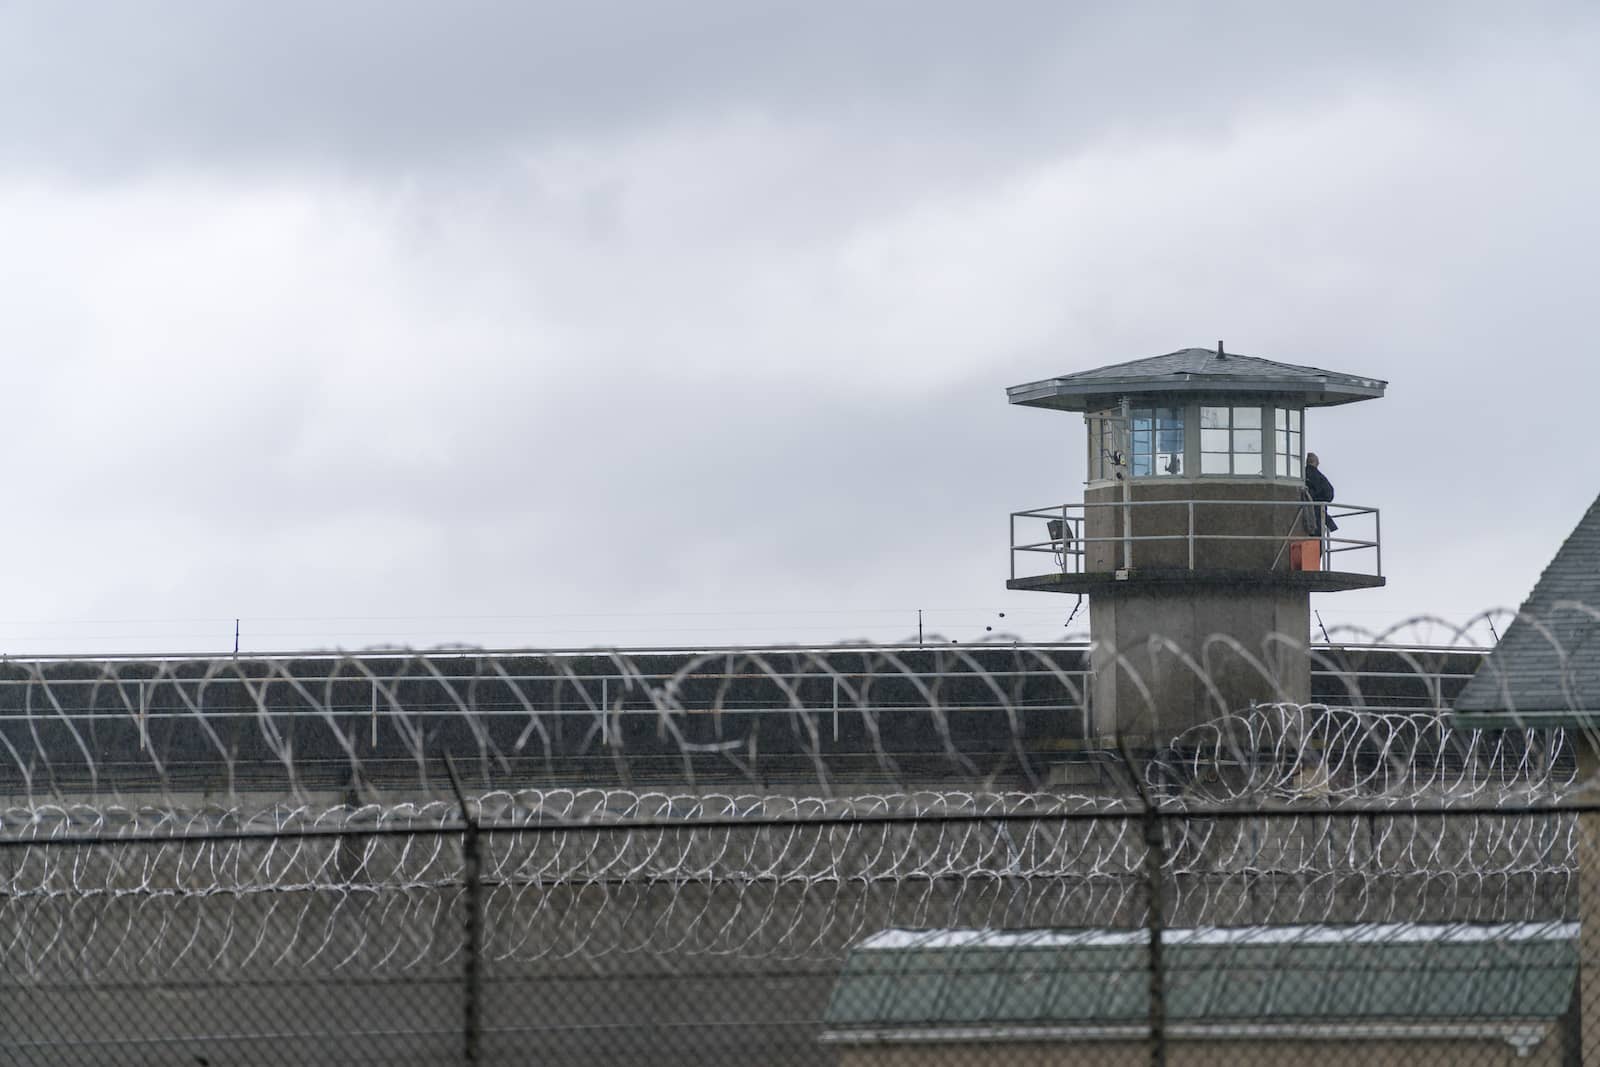 The Benefits and Applications of PoE in Correctional Facilities